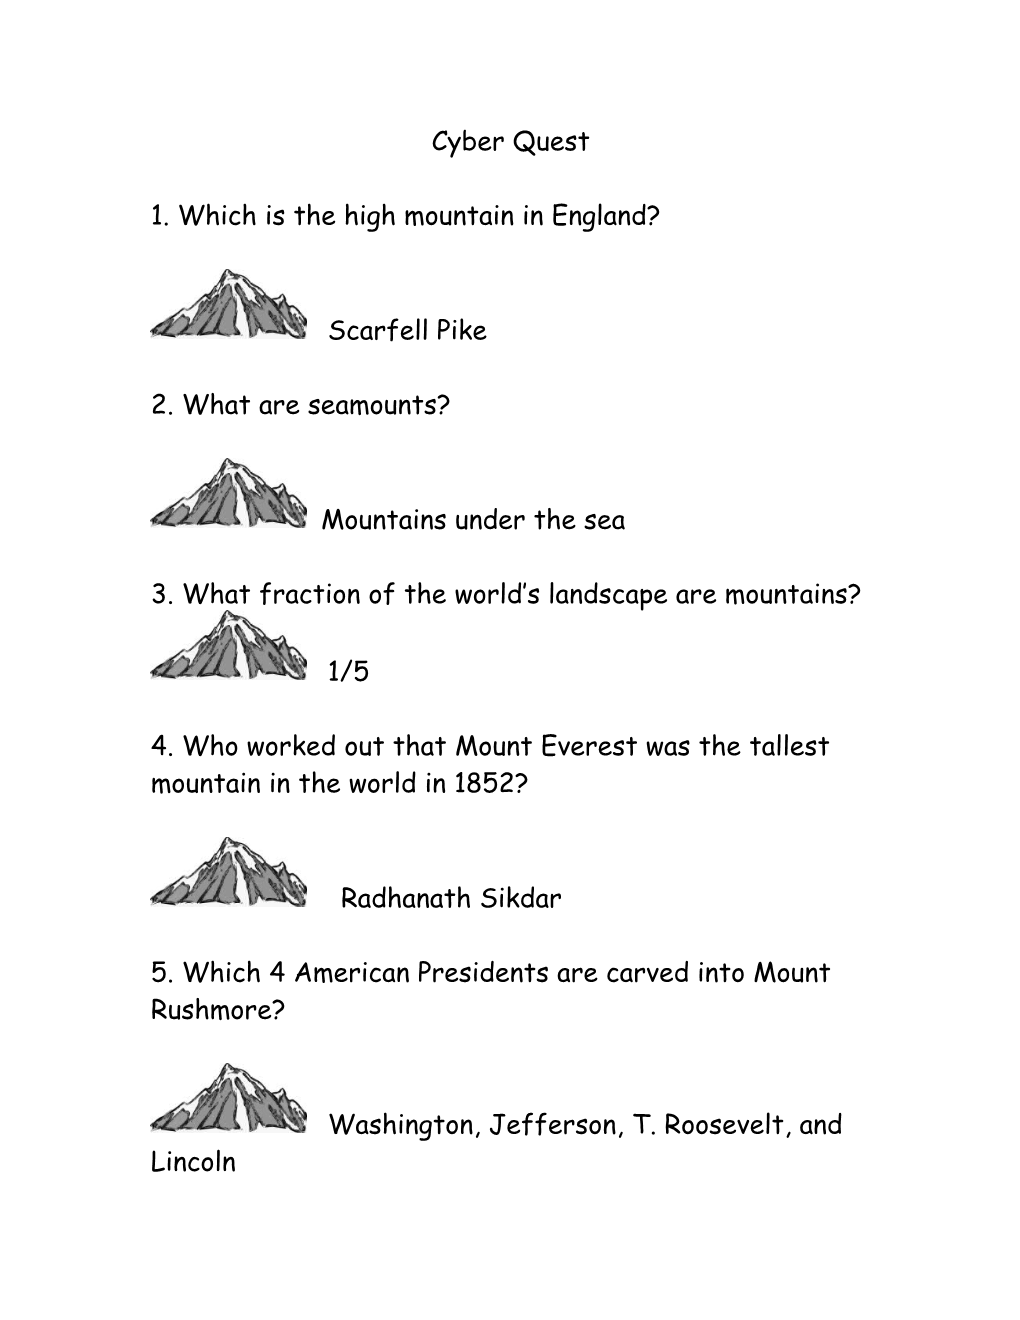 1. Which Is the High Mountain in England?